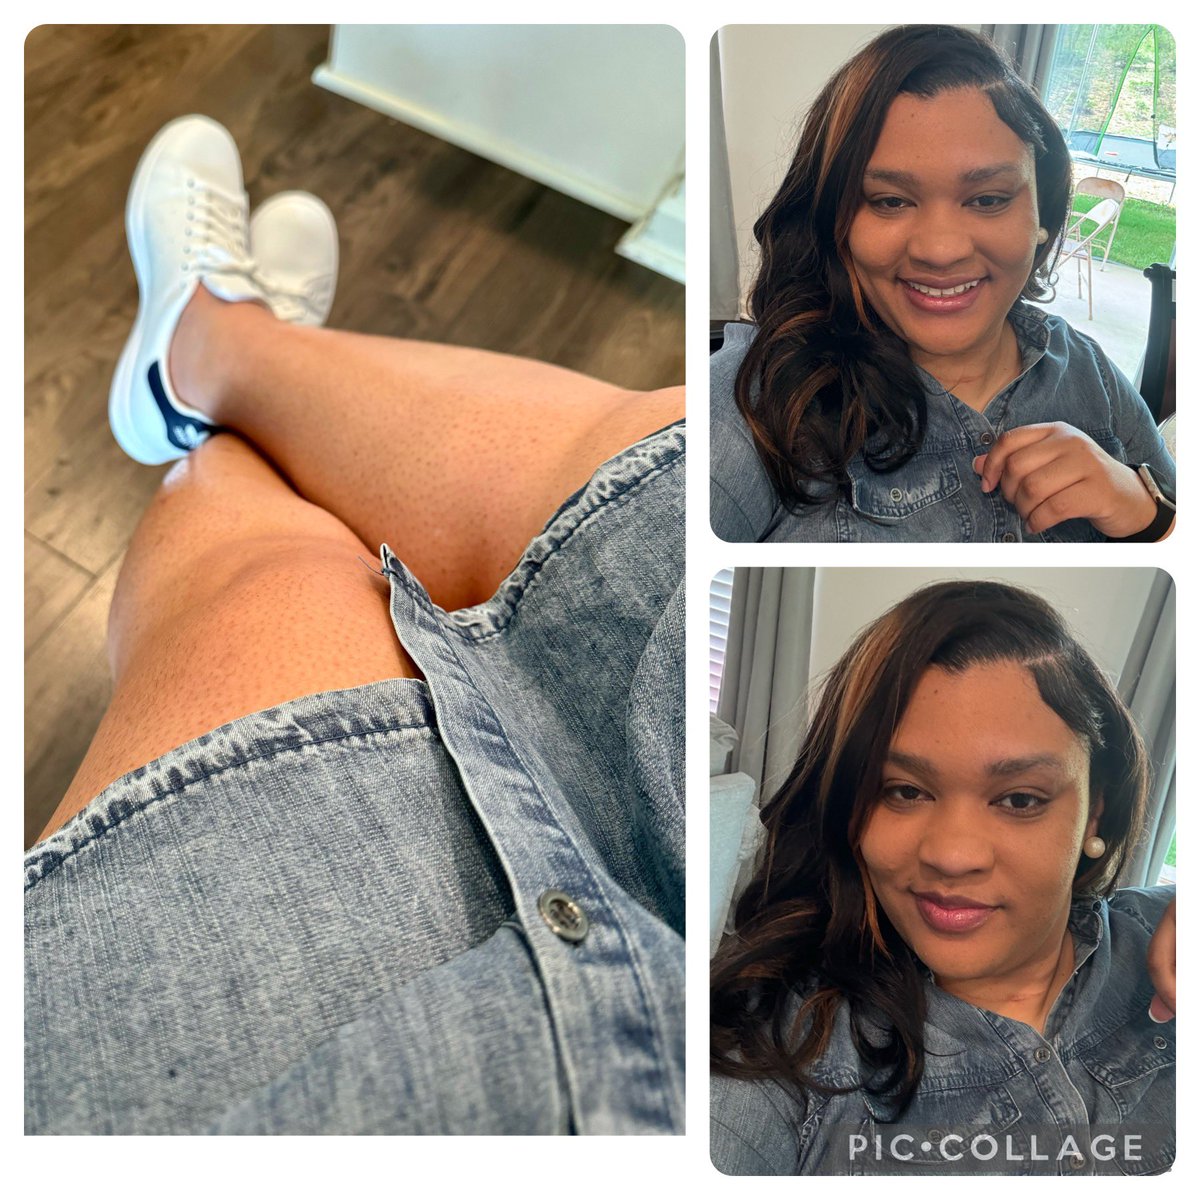 Just out here AAUing supporting my son son. ♥️I’m rocking my Adidas today.  #3stripes #GameElitevsEverybody! 🏀 #Landrewcrew #sportsmom